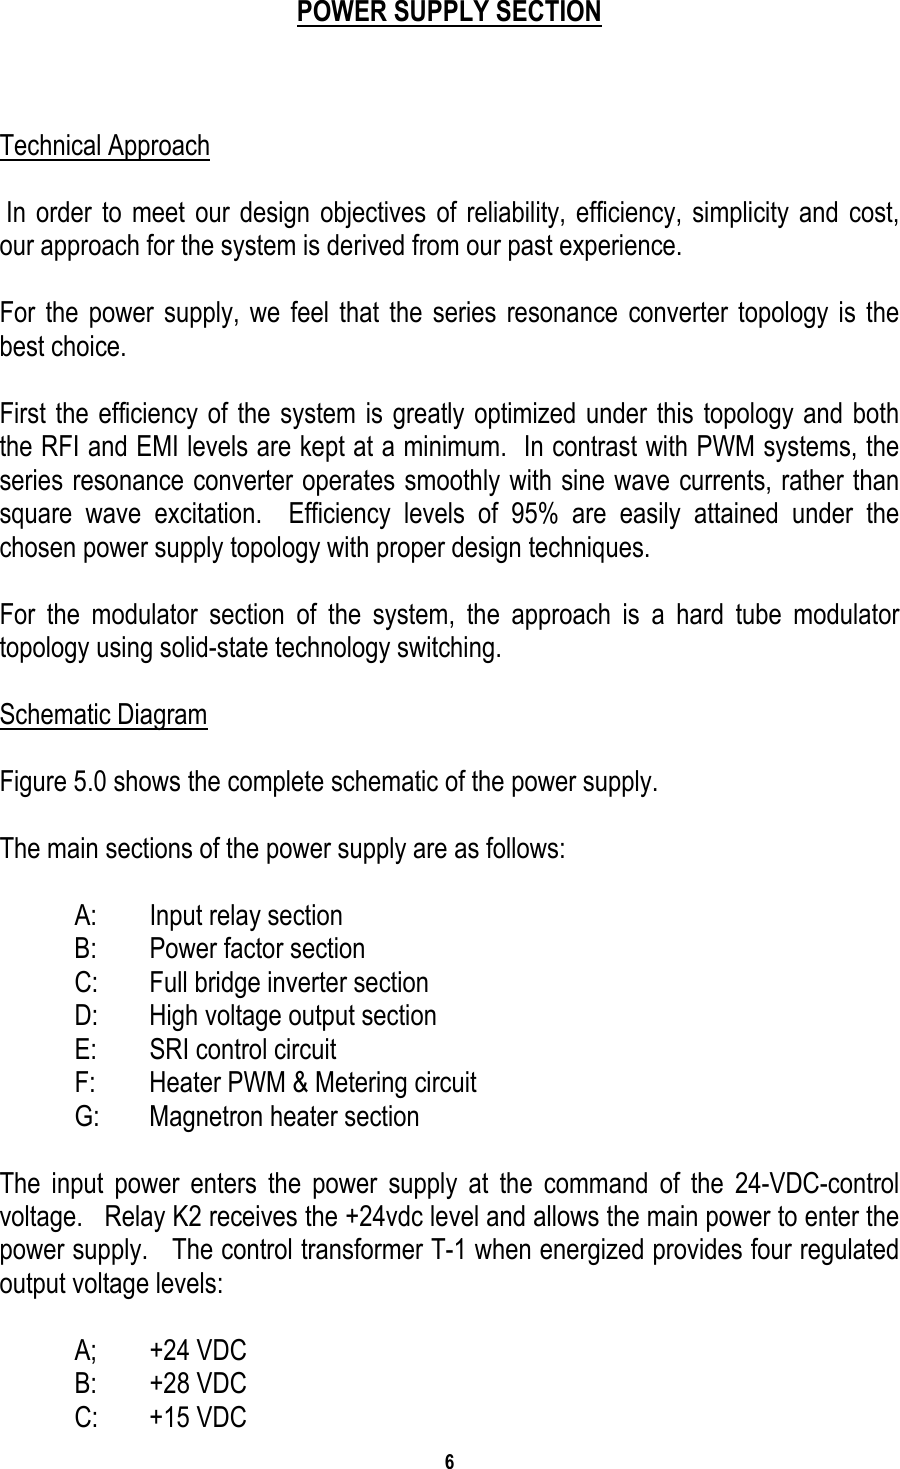 6    POWER SUPPLY SECTION    Technical Approach   In order to meet our design objectives of reliability, efficiency, simplicity and cost, our approach for the system is derived from our past experience.  For the power supply, we feel that the series resonance converter topology is the best choice.   First the efficiency of the system is greatly optimized under this topology and both the RFI and EMI levels are kept at a minimum.  In contrast with PWM systems, the series resonance converter operates smoothly with sine wave currents, rather than   square wave excitation.  Efficiency levels of 95% are easily attained under the chosen power supply topology with proper design techniques.  For the modulator section of the system, the approach is a hard tube modulator topology using solid-state technology switching.    Schematic Diagram  Figure 5.0 shows the complete schematic of the power supply.   The main sections of the power supply are as follows:    A:  Input relay section   B:  Power factor section   C:  Full bridge inverter section   D:  High voltage output section   E:  SRI control circuit   F:  Heater PWM &amp; Metering circuit   G:  Magnetron heater section  The input power enters the power supply at the command of the 24-VDC-control voltage.   Relay K2 receives the +24vdc level and allows the main power to enter the power supply.   The control transformer T-1 when energized provides four regulated output voltage levels:   A; +24 VDC  B: +28 VDC  C: +15 VDC 